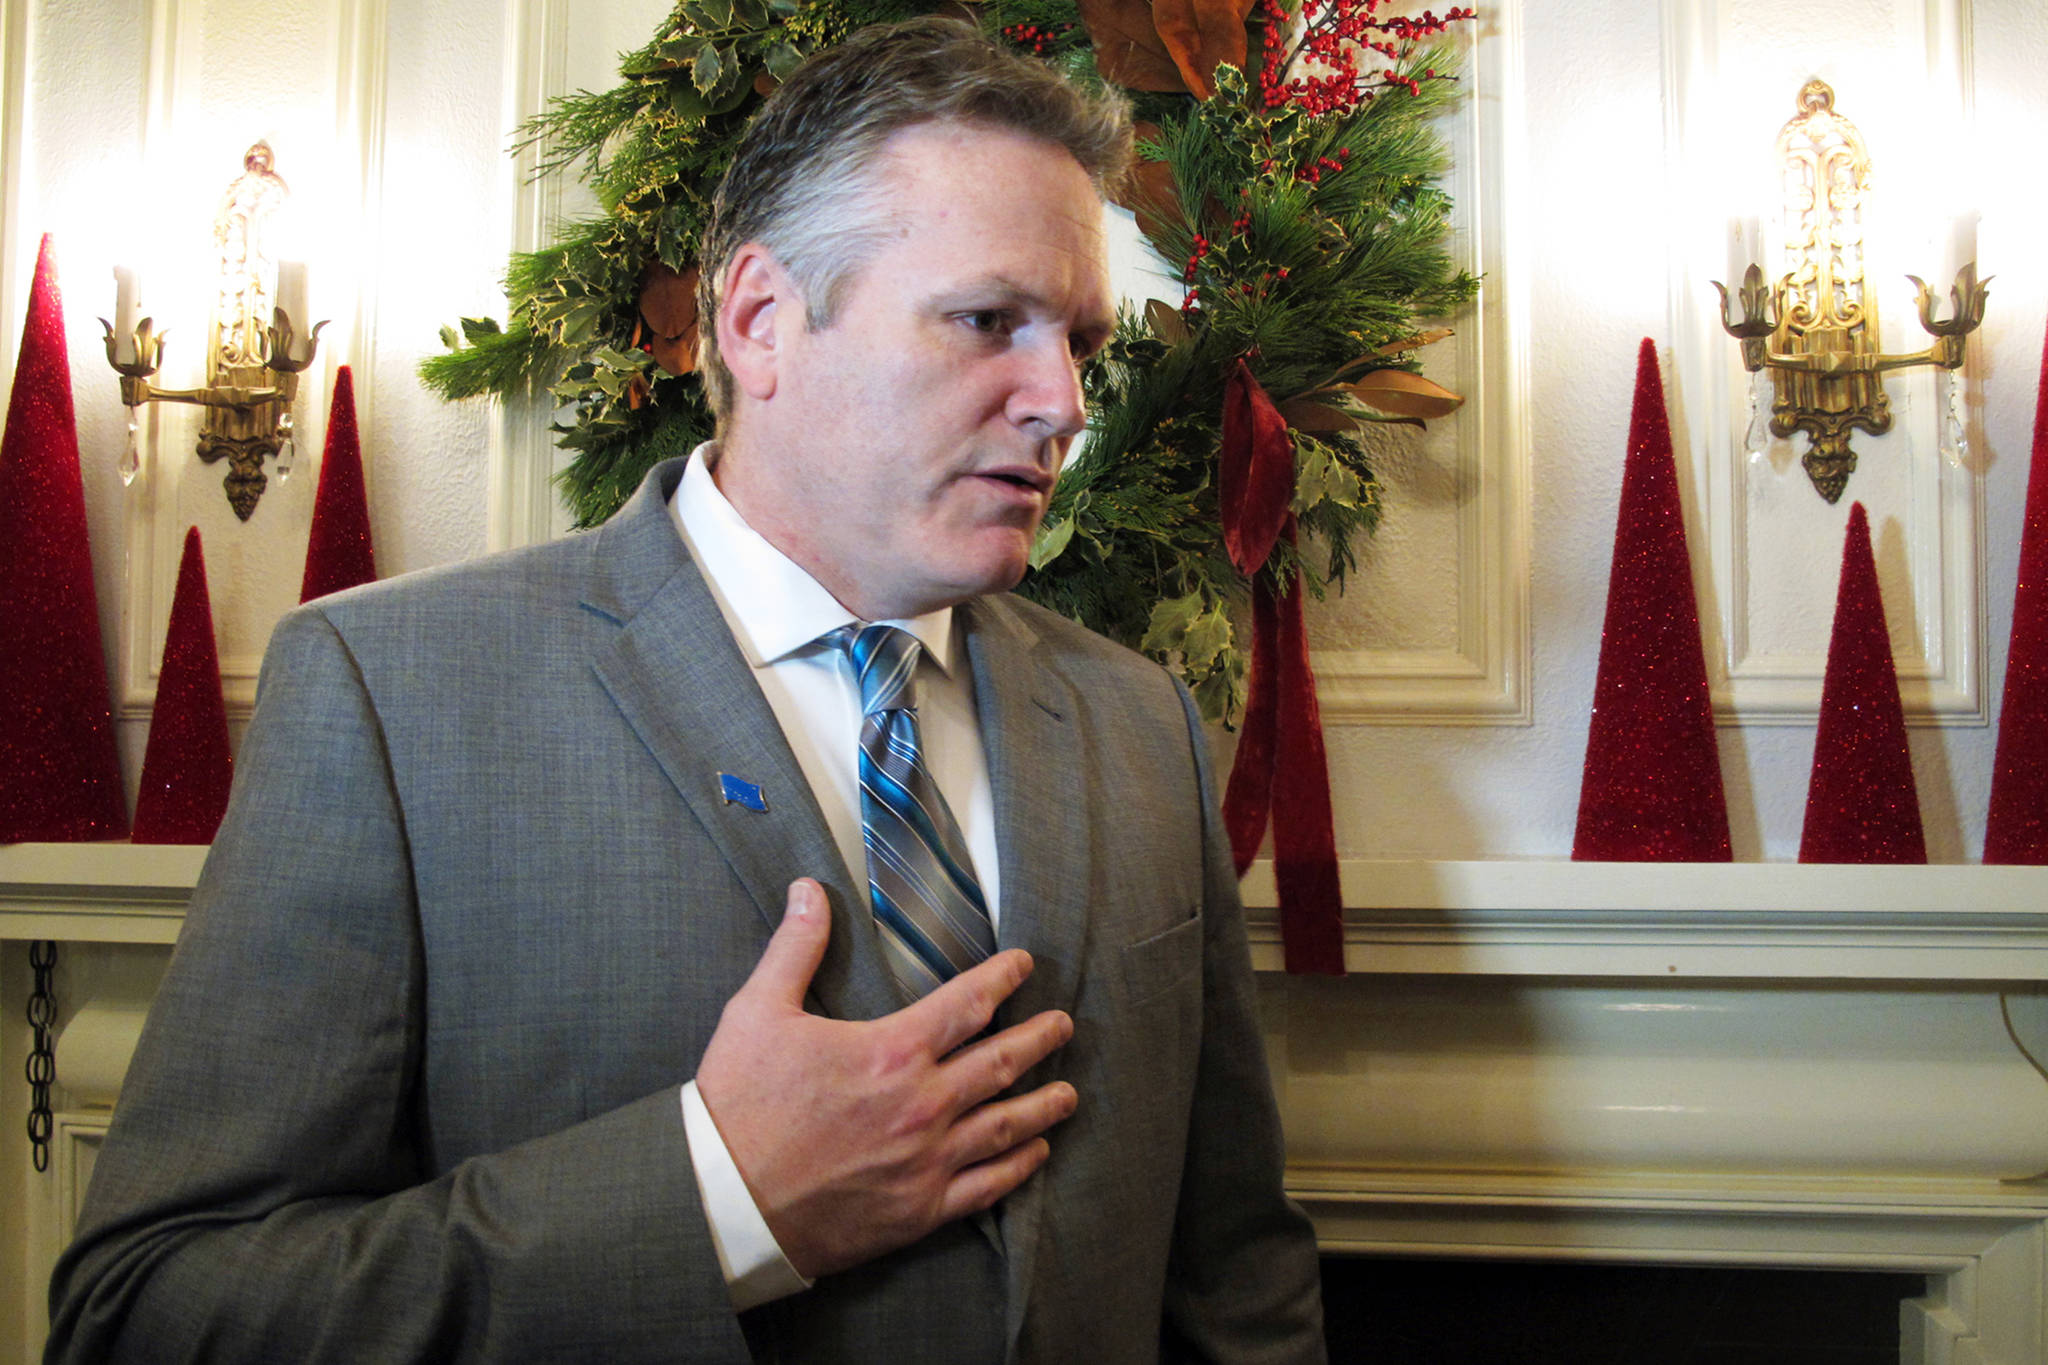 Alaska Gov. Mike Dunleavy answers a reporter’s question before the start of a holiday open house at the governor’s mansion on Tuesday, Dec. 11, 2018, in Juneau, Alaska. The open house doubled as an inaugural event for Dunleavy, who took office last week. (Becky Bohrer | Associated Press File)